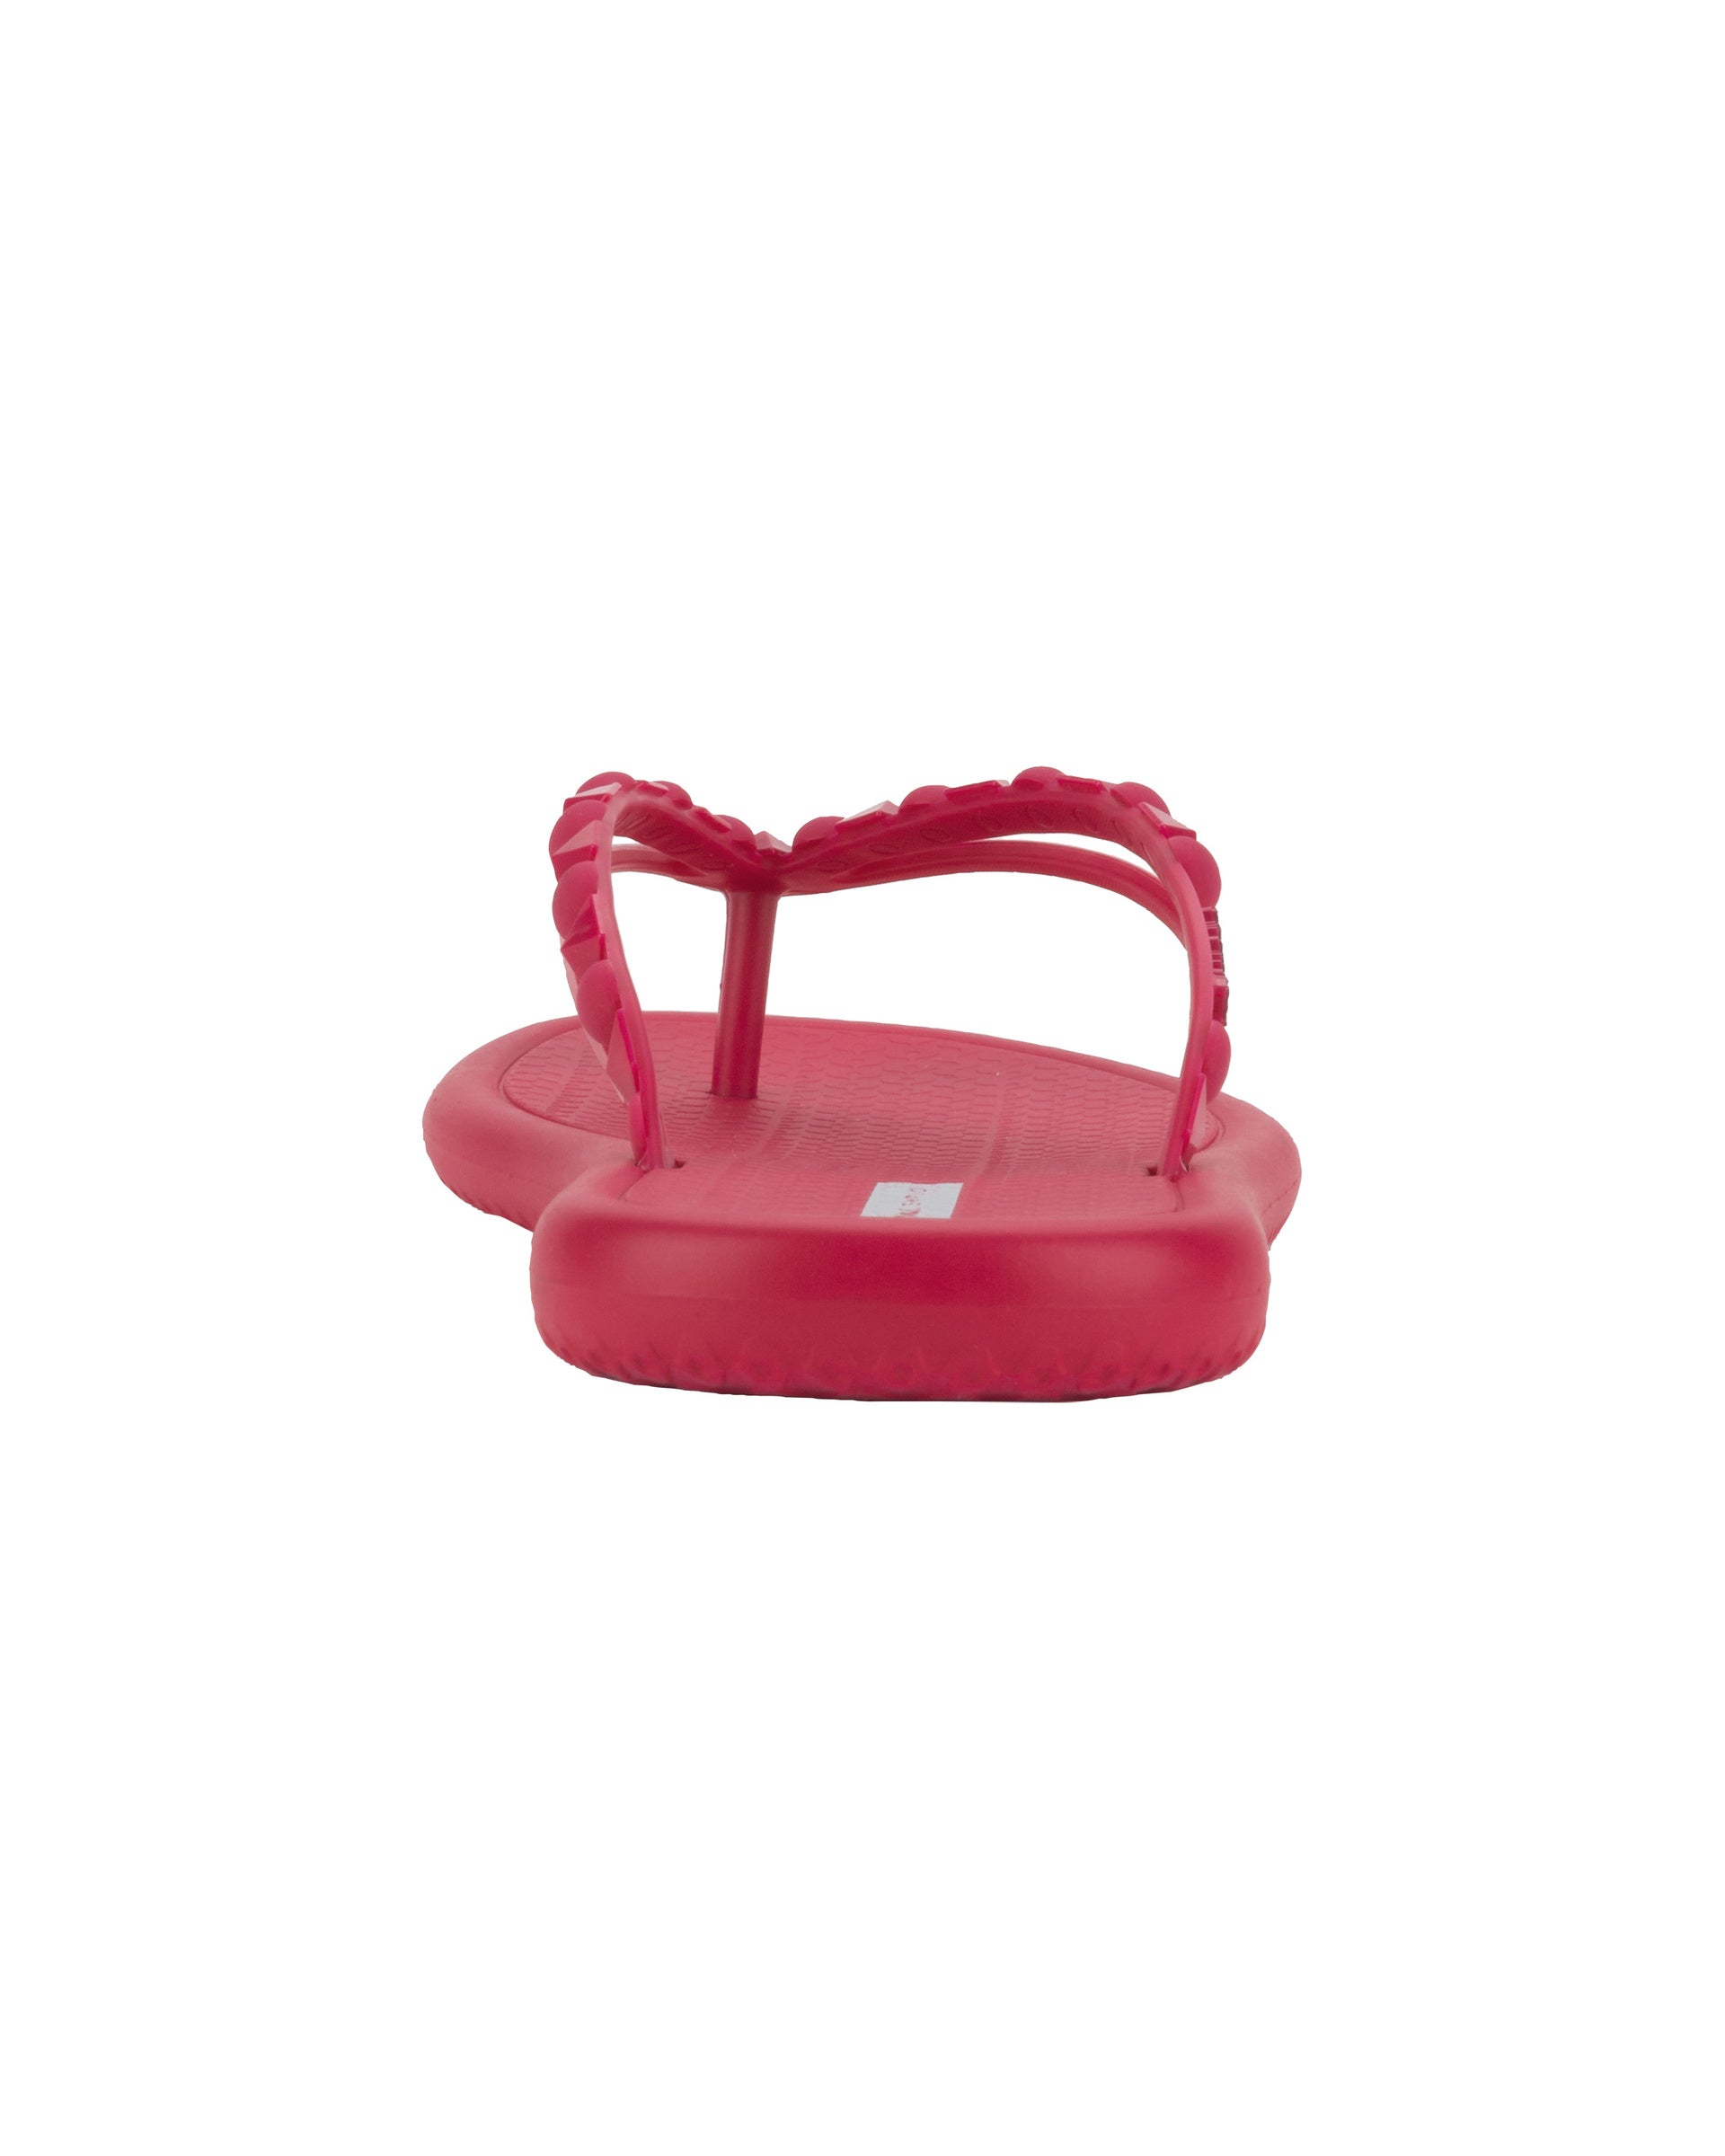 Back view of a dark pink Ipanema Meu Sol women's flip flop with stud details on strap.